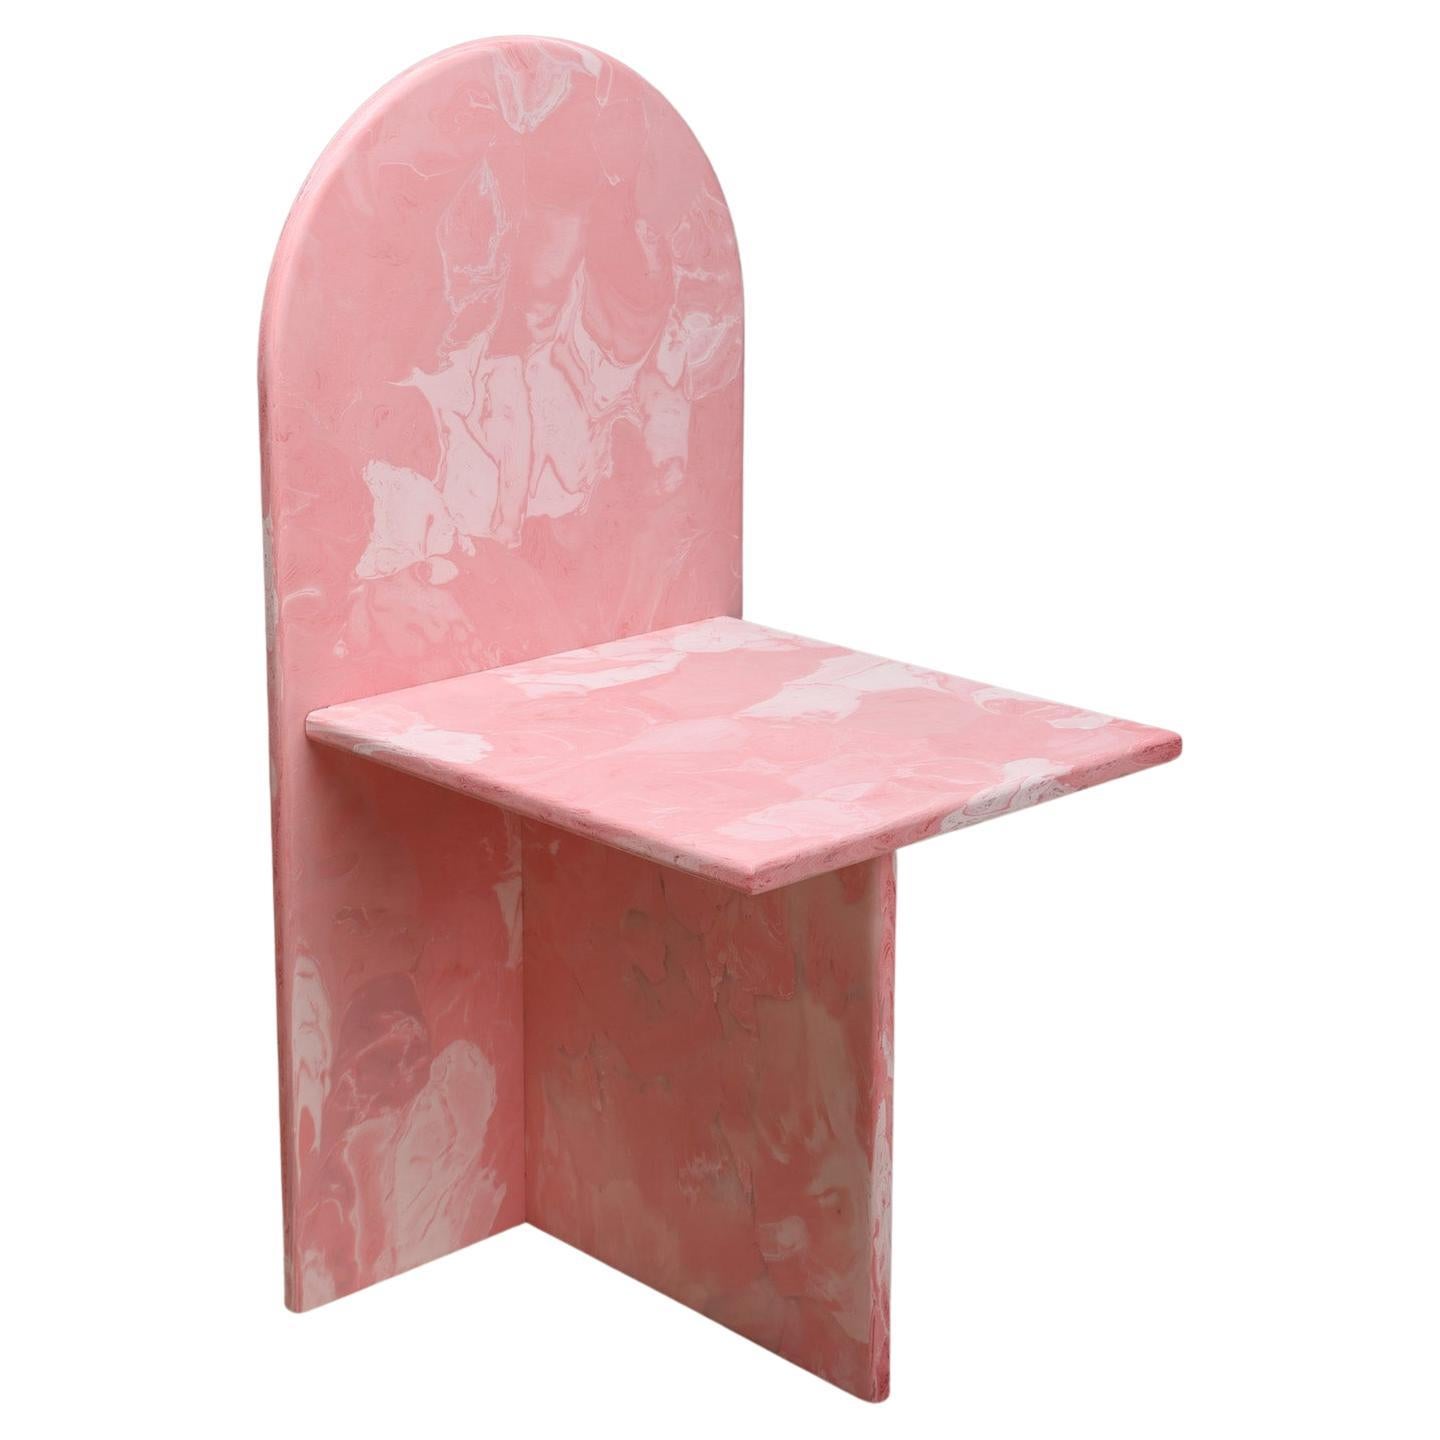 Contemporary Pink Chair Hand-Crafted from 100% Recycled Plastic by Anqa Studios